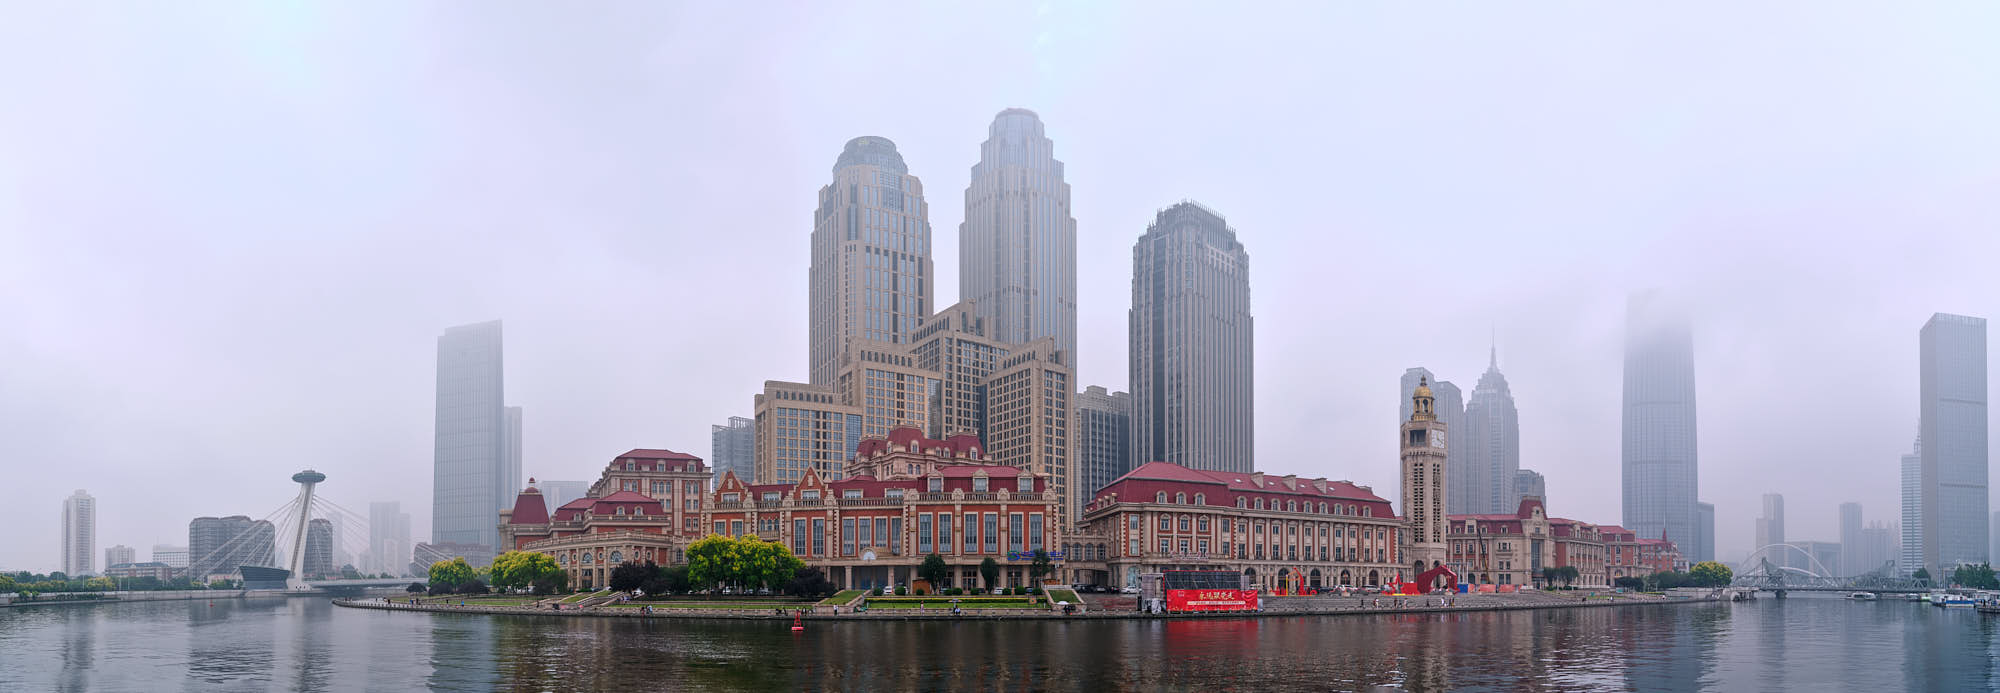 Haihe River architecture in Tianjin, China